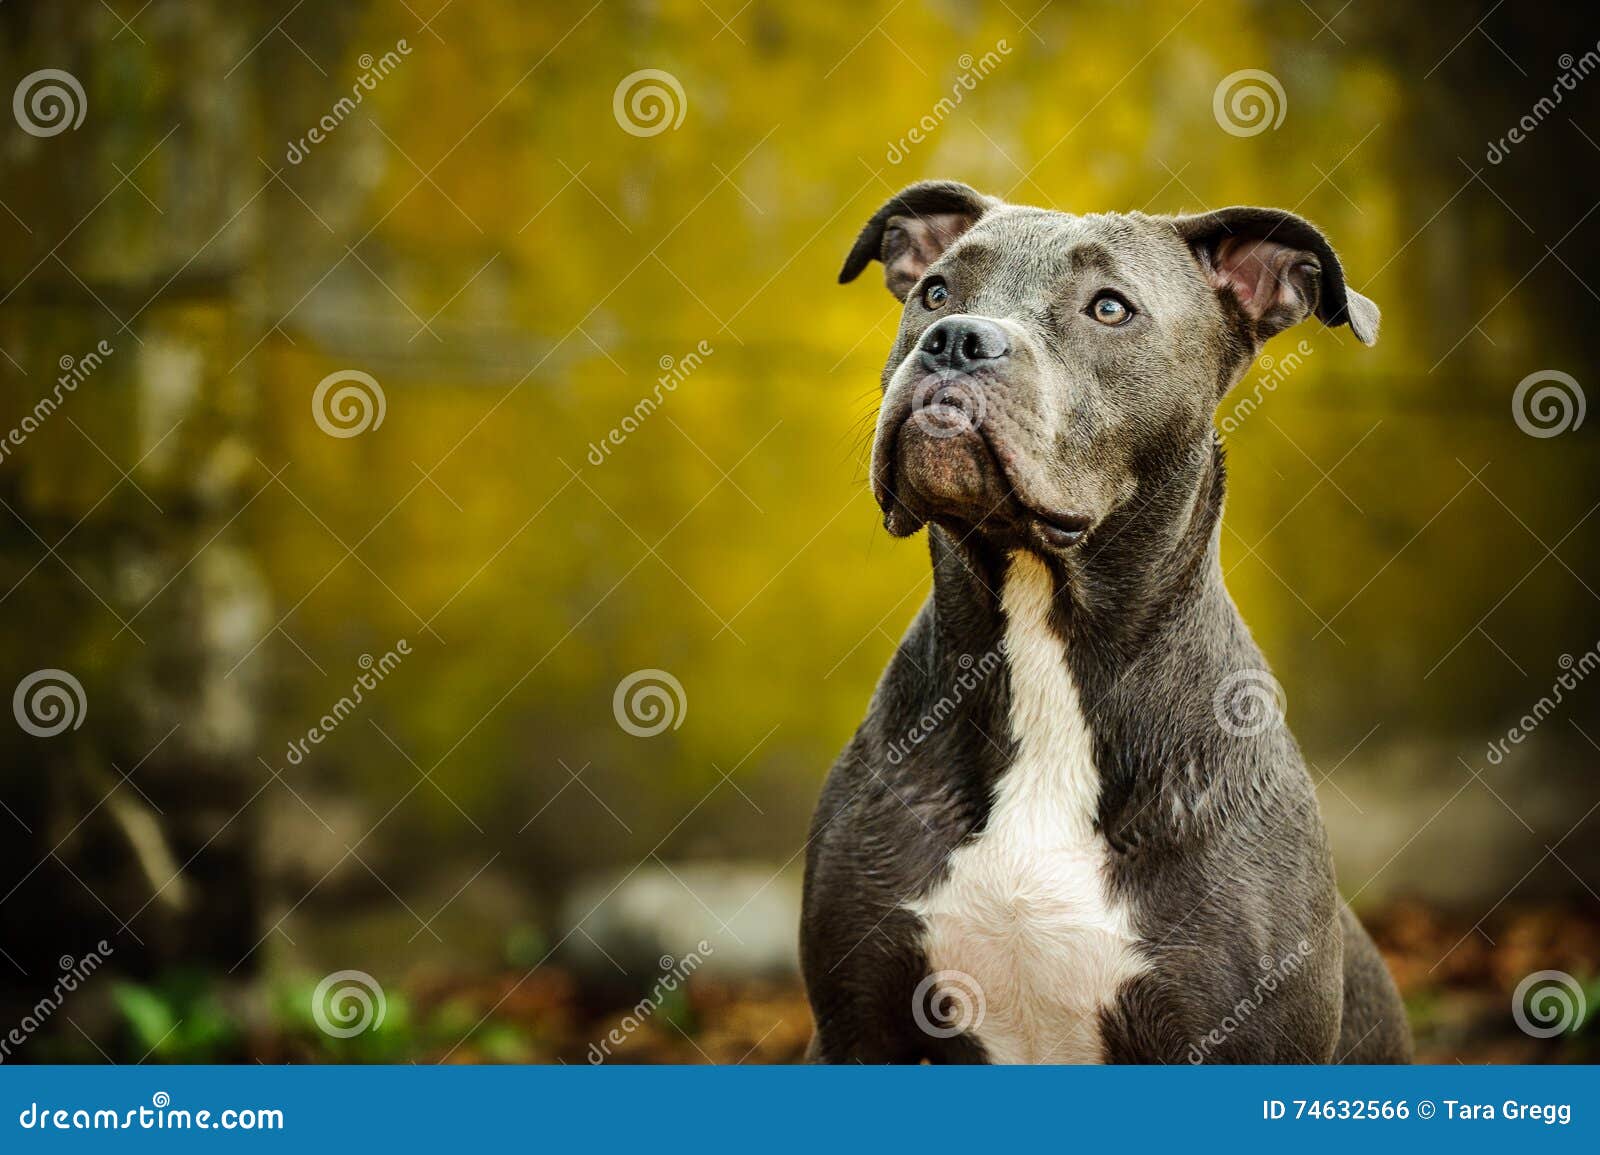 blue nose american pit bull terrier dog